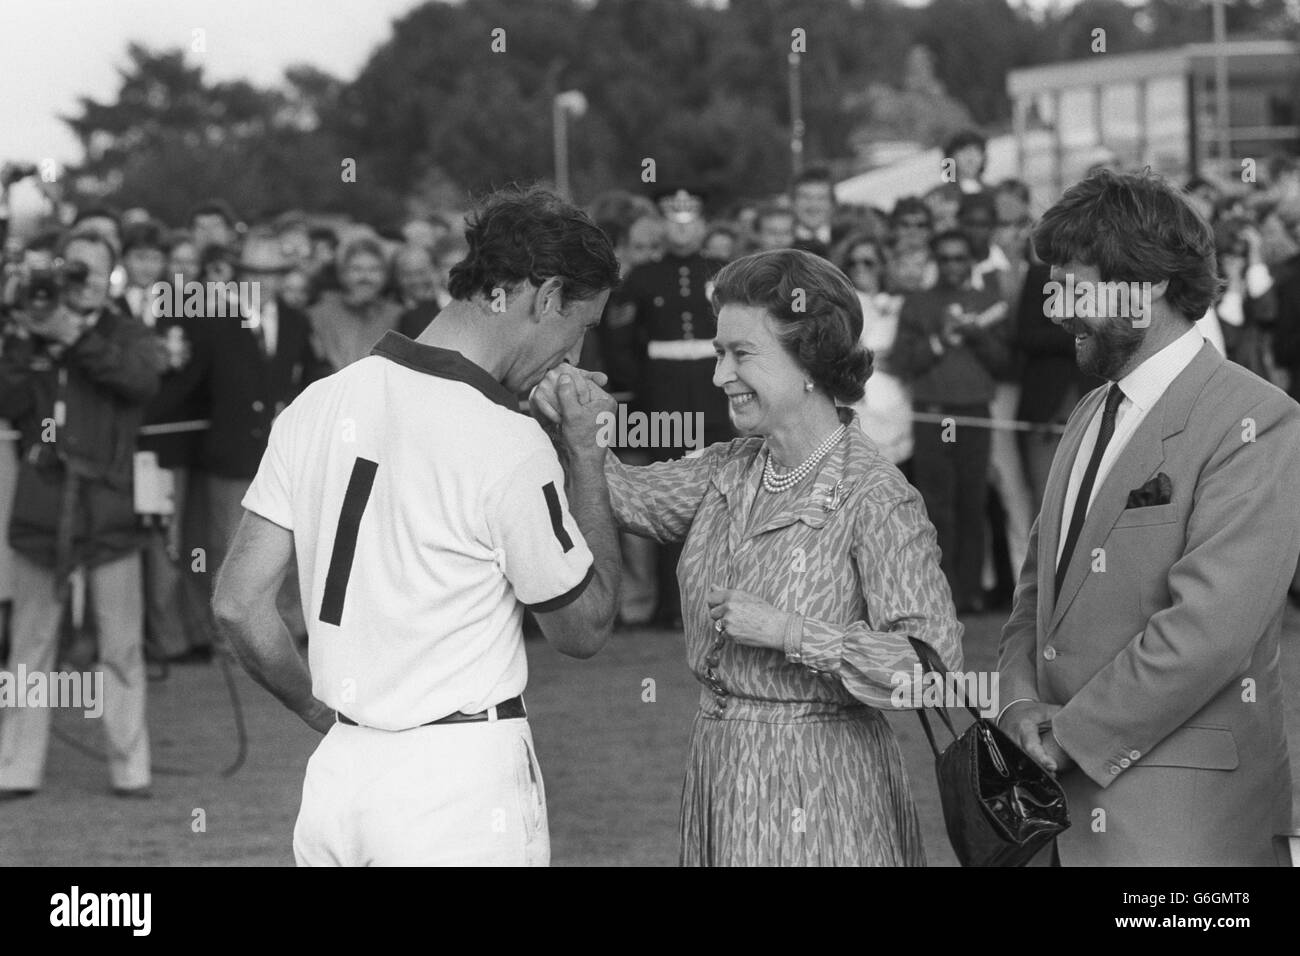 Prince Charles gallantly kisses the hand of his mother, Queen Elizabeth II, at the presentation ceremony of the Silver Jubilee Cup at the Guards Polo Club, Windsor Great Park. The Prince's team, England II, beat Brazil to take the cup. Stock Photo